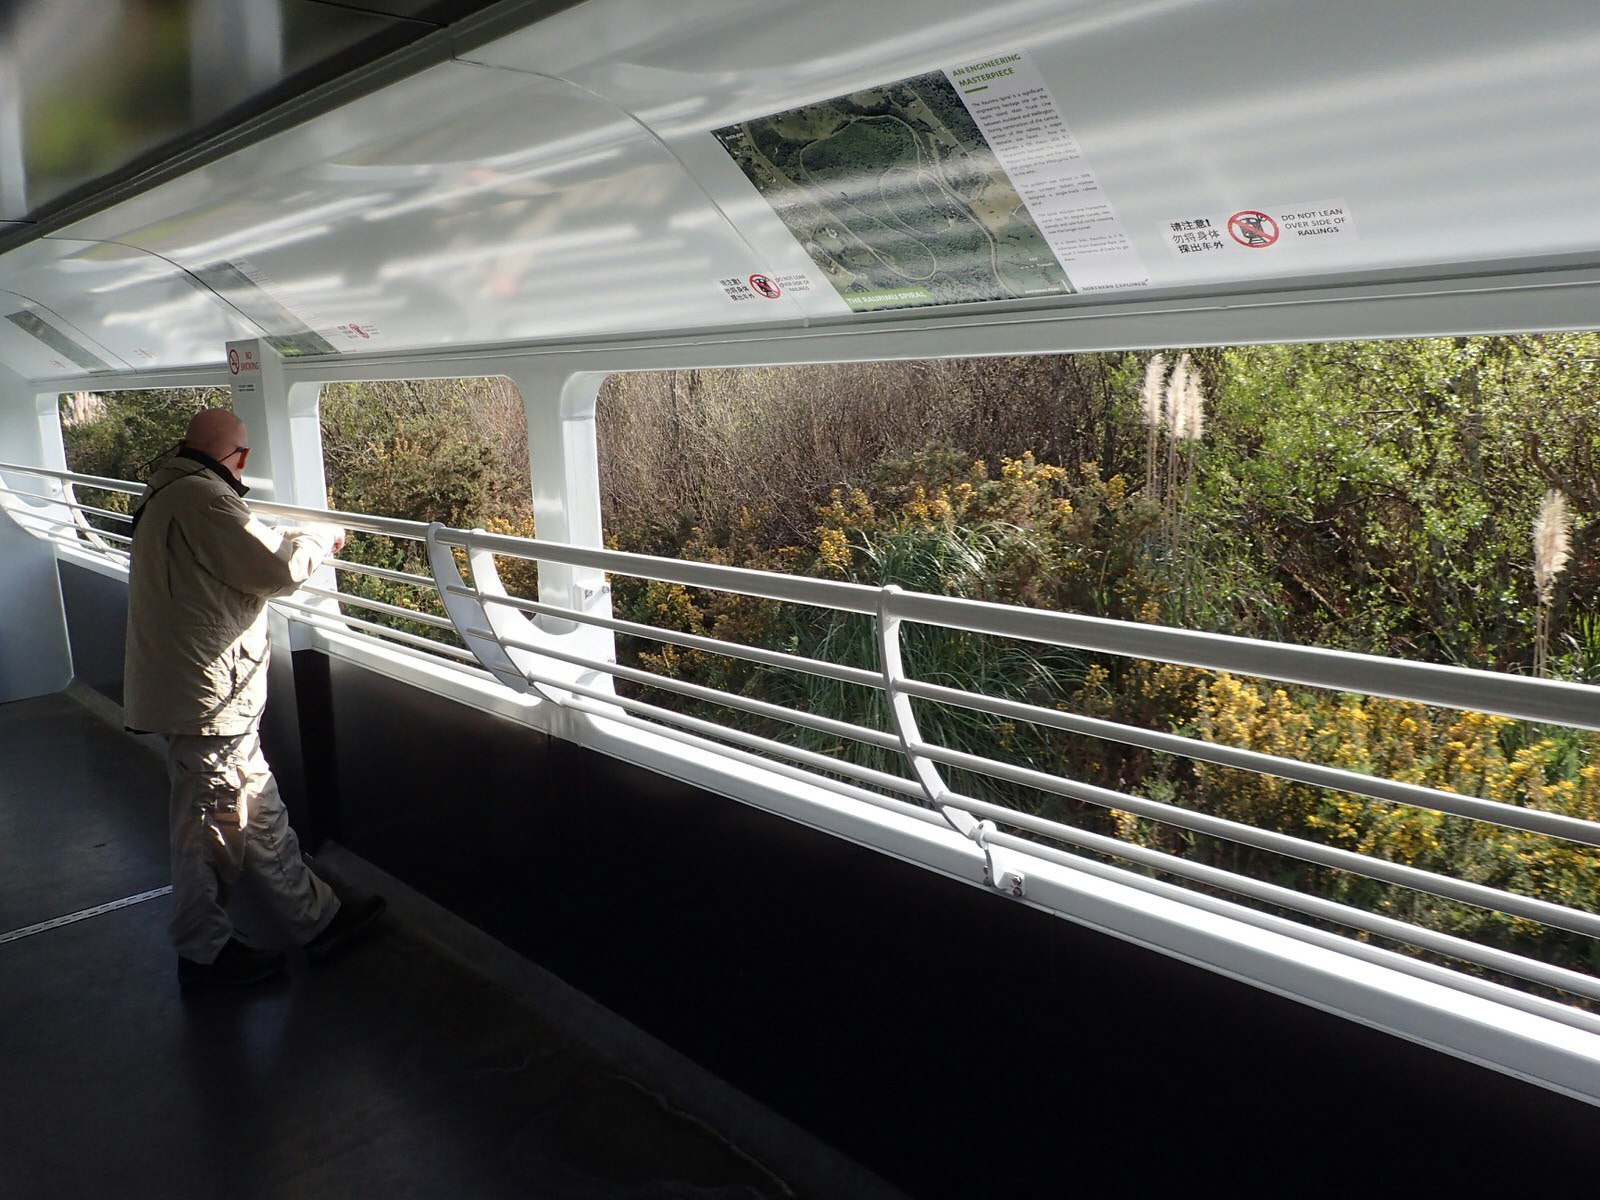 Observation car in Northern Explorer train, New Zealand looking out on lush greenery. One passenger is standing near the railings.